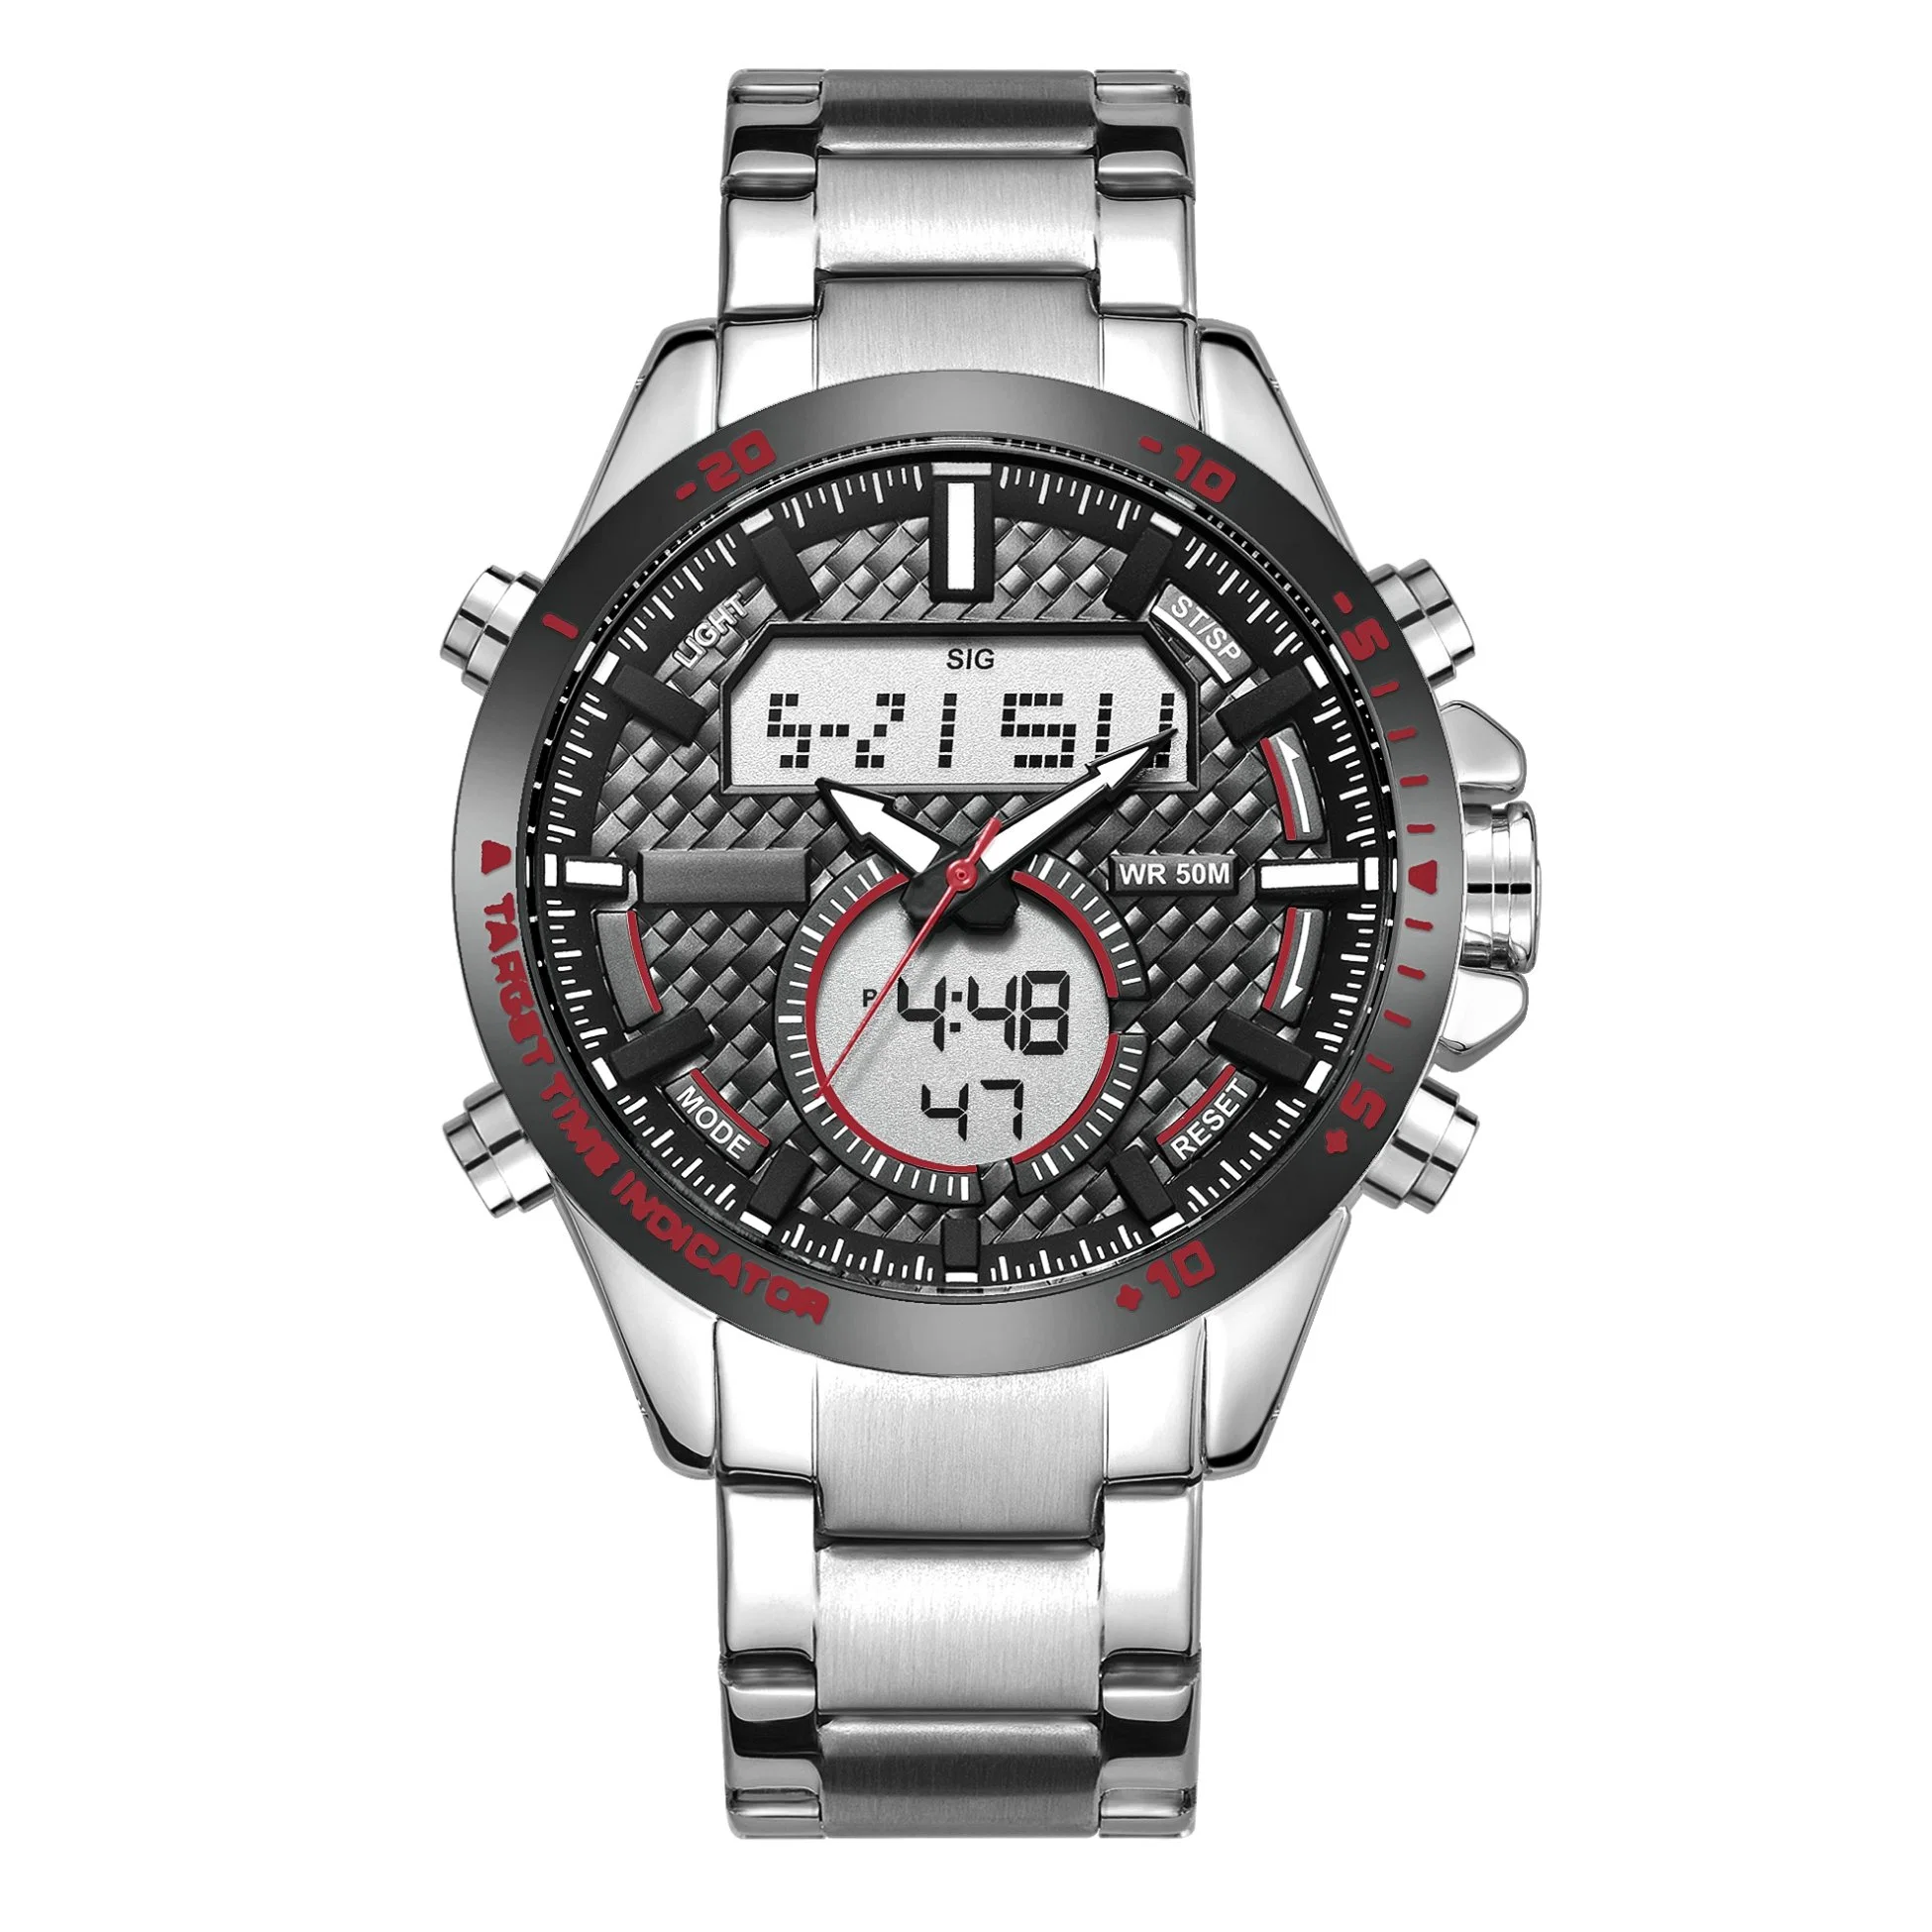 Analog-Digital Watch for Wrist Watch with Fashion Watch at China Watch in Stainless Steel Watch